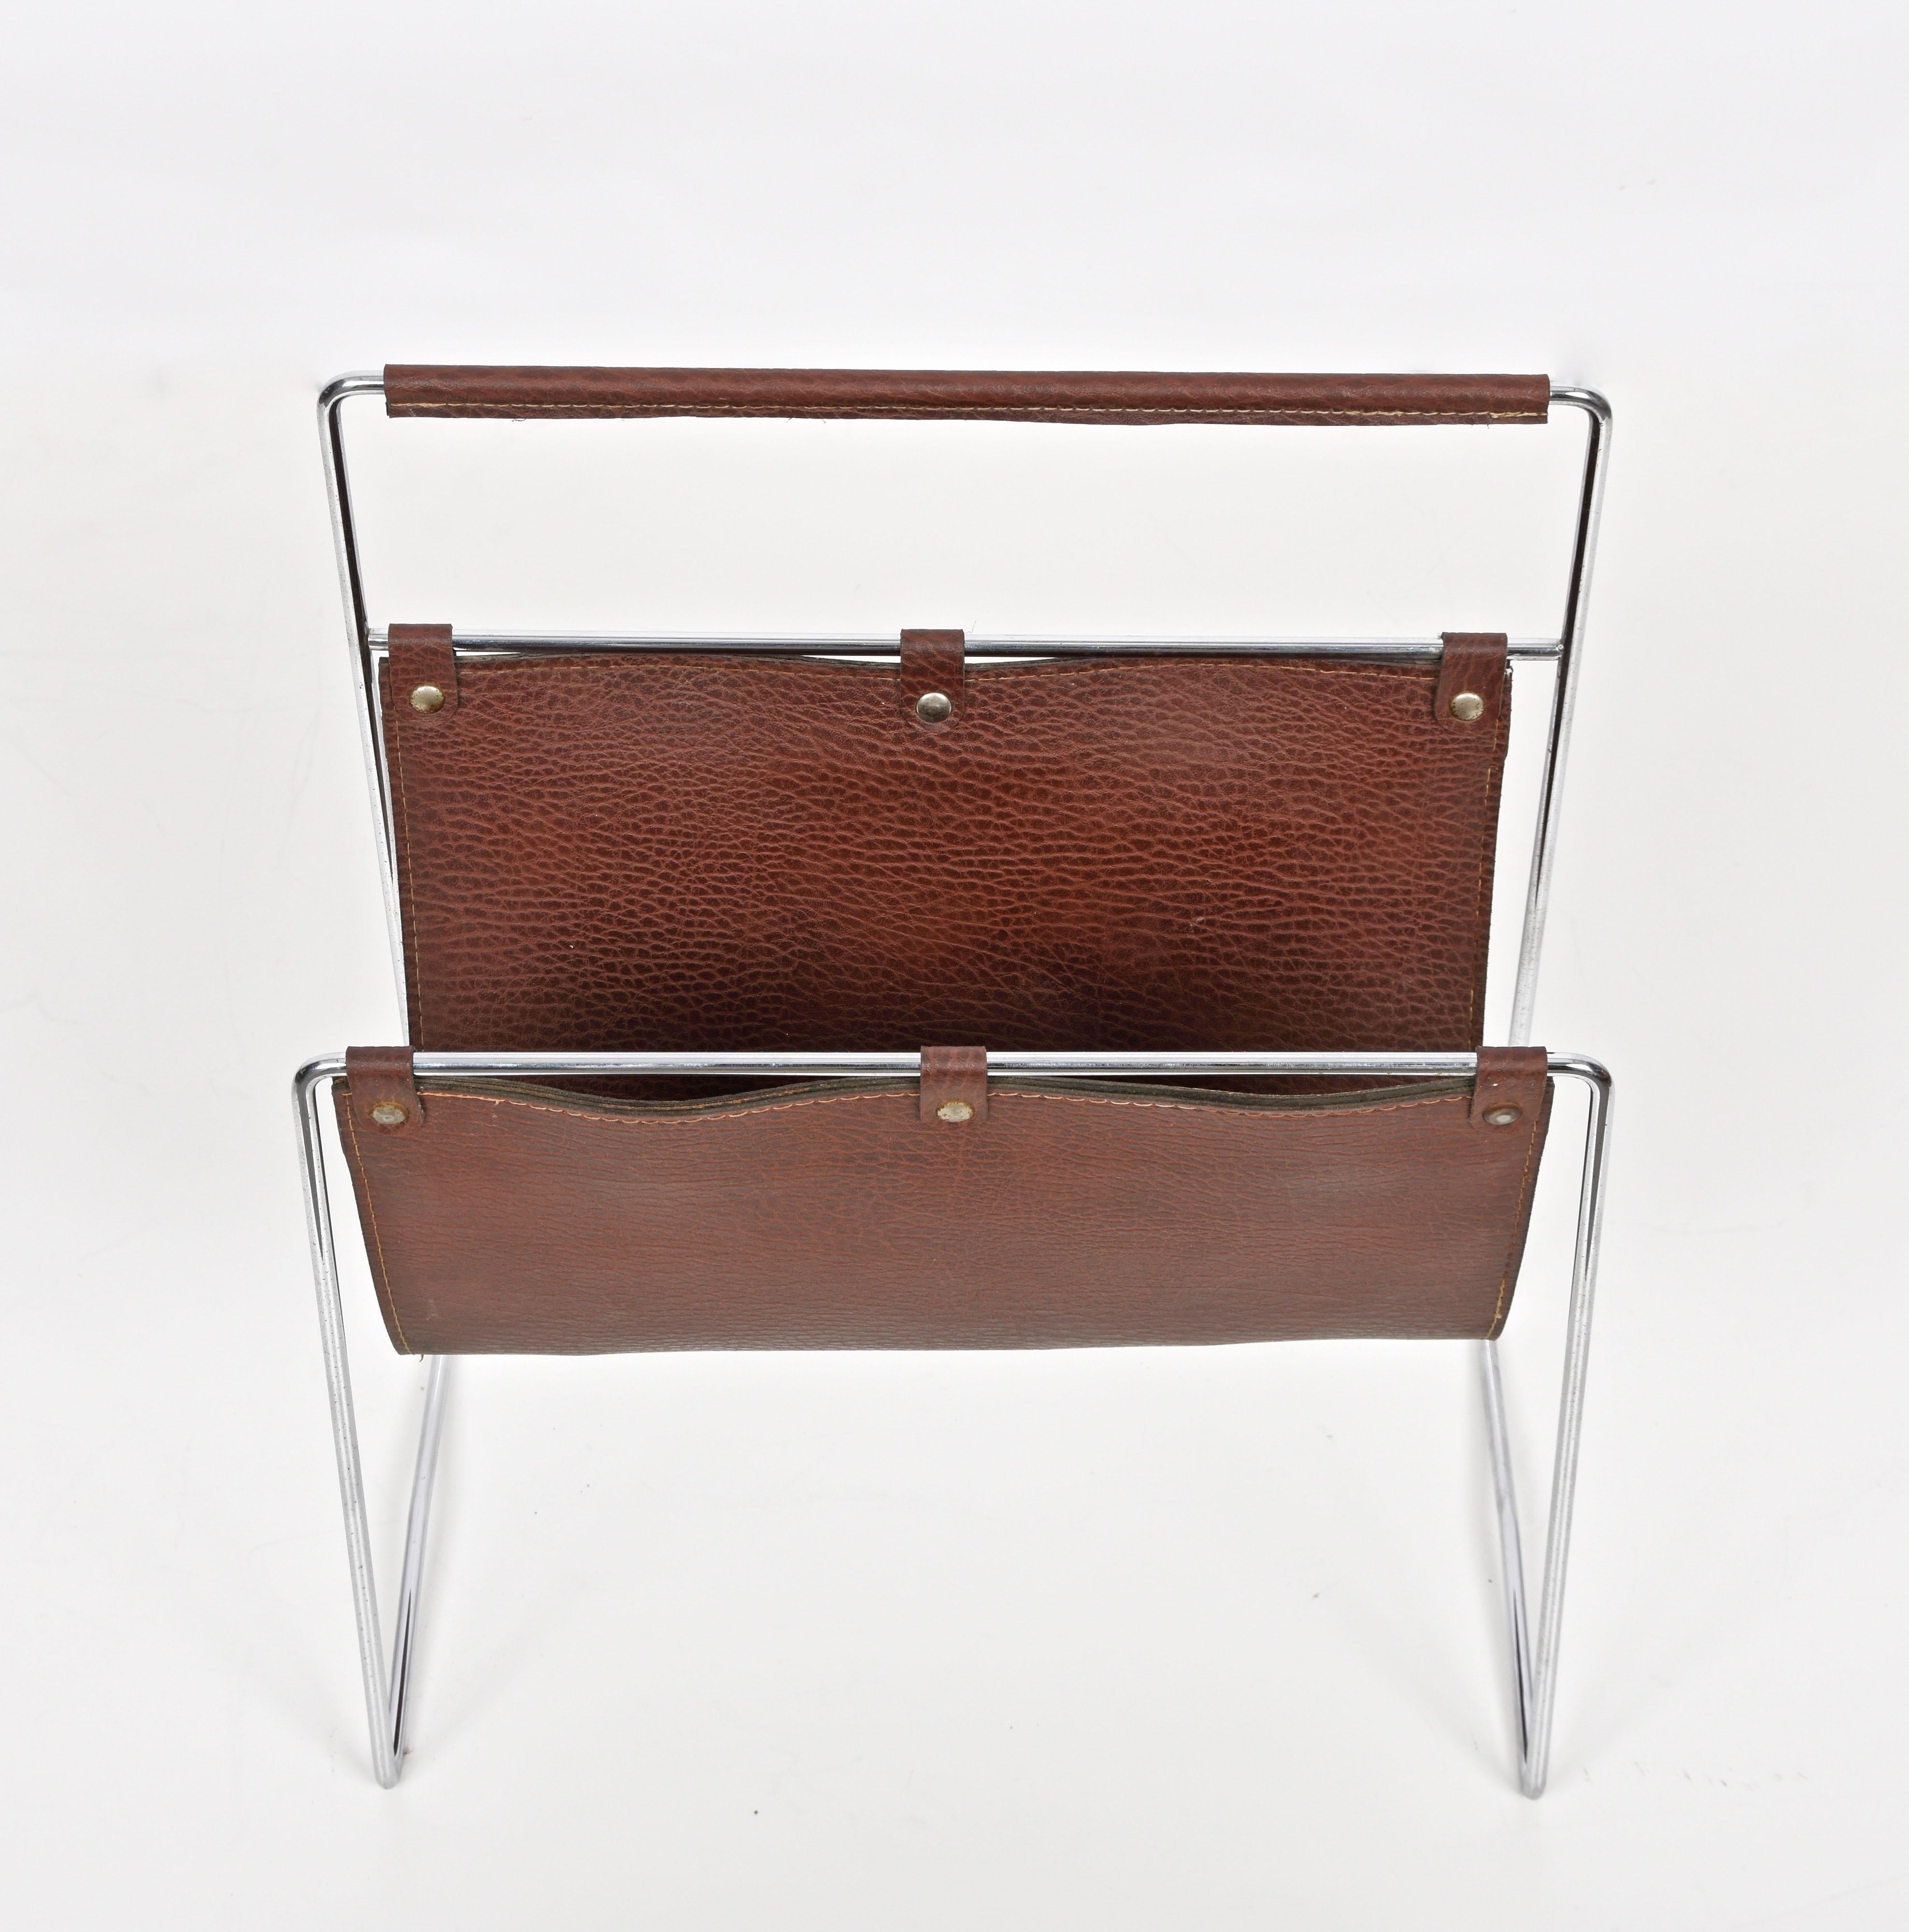 Late 20th Century Midcentury Chromed Steel and Leather French Magazine Rack After Adnet, 1970s